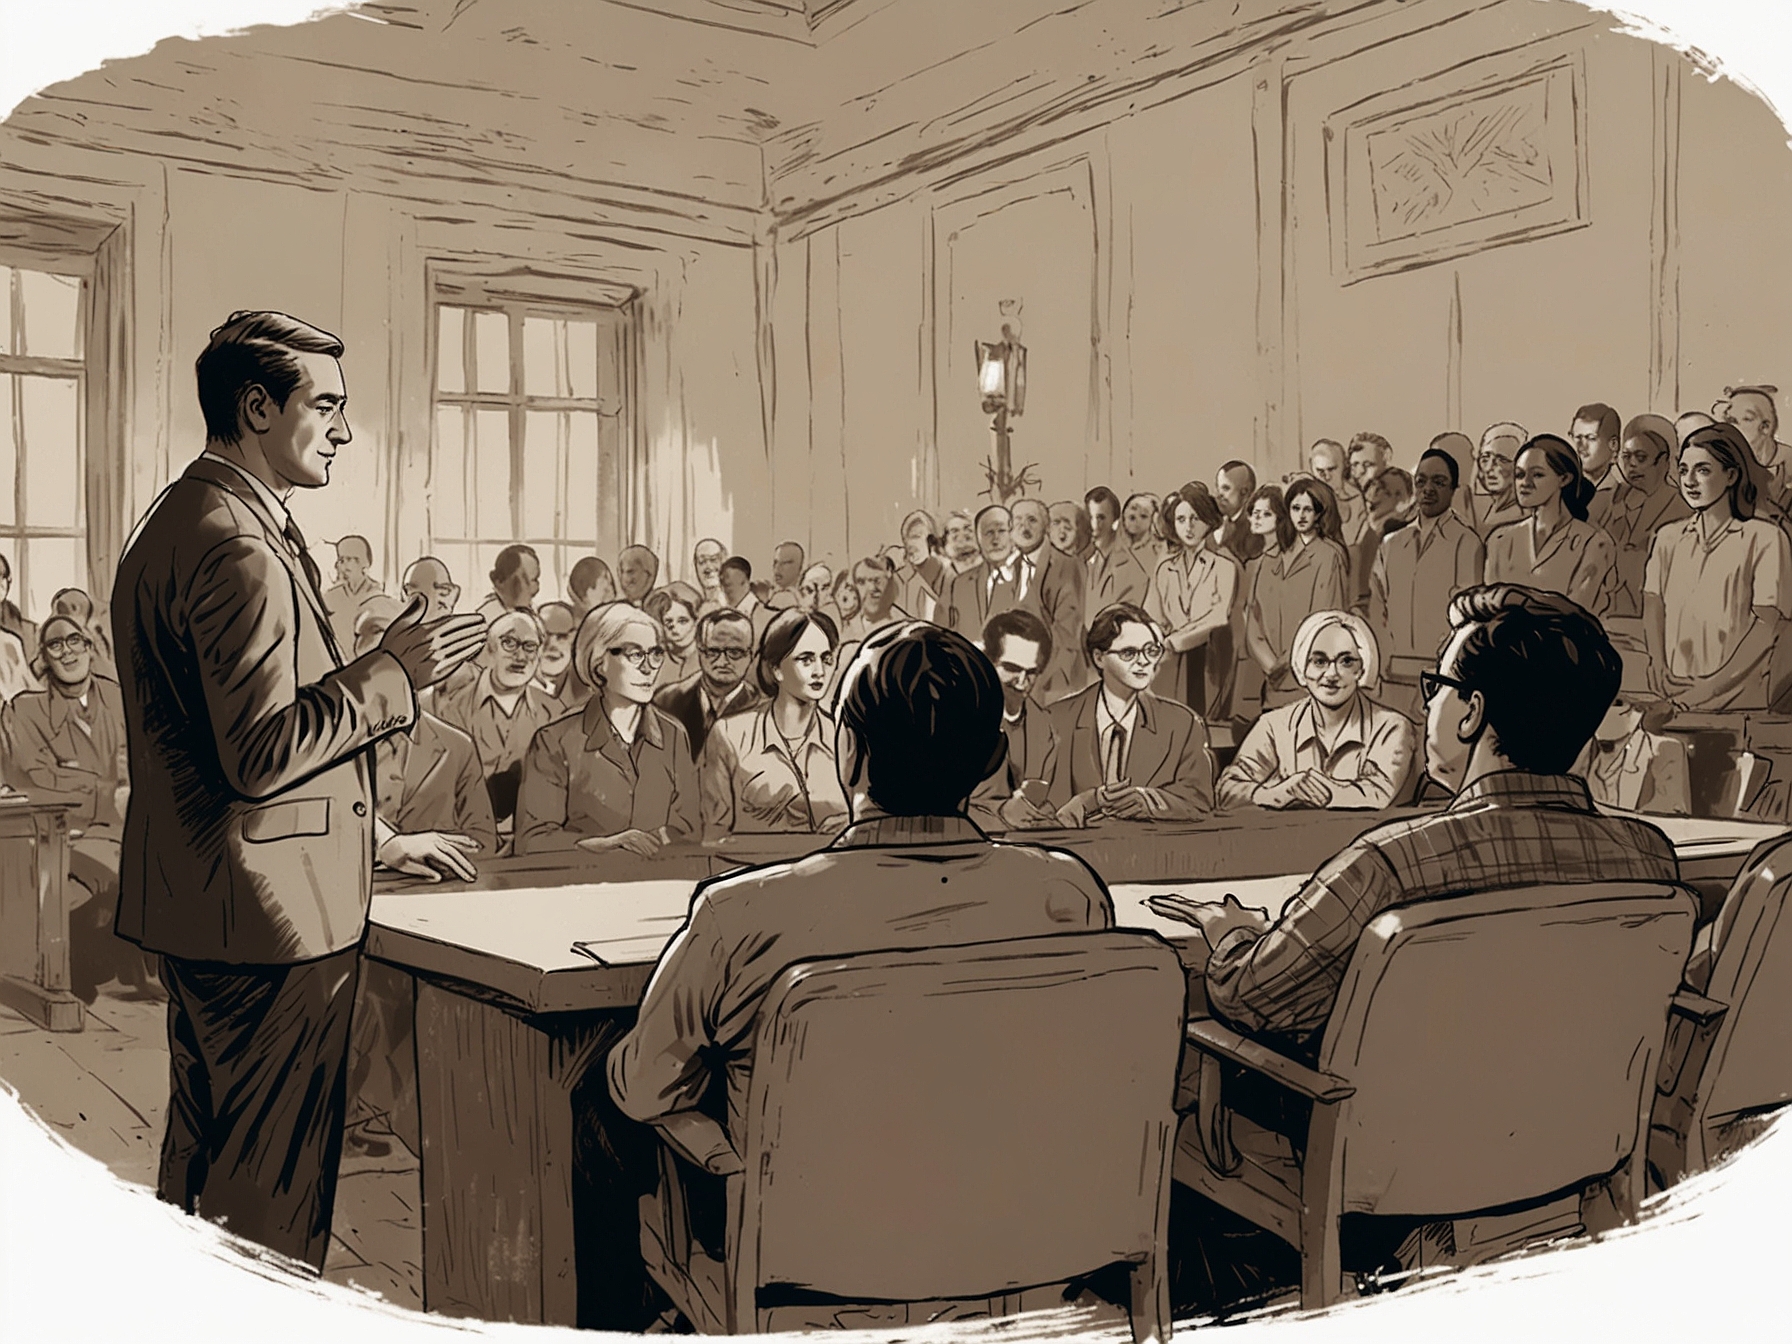 An illustration showing citizens participating in a town hall meeting, engaging with their representatives to voice opinions and discuss community concerns.